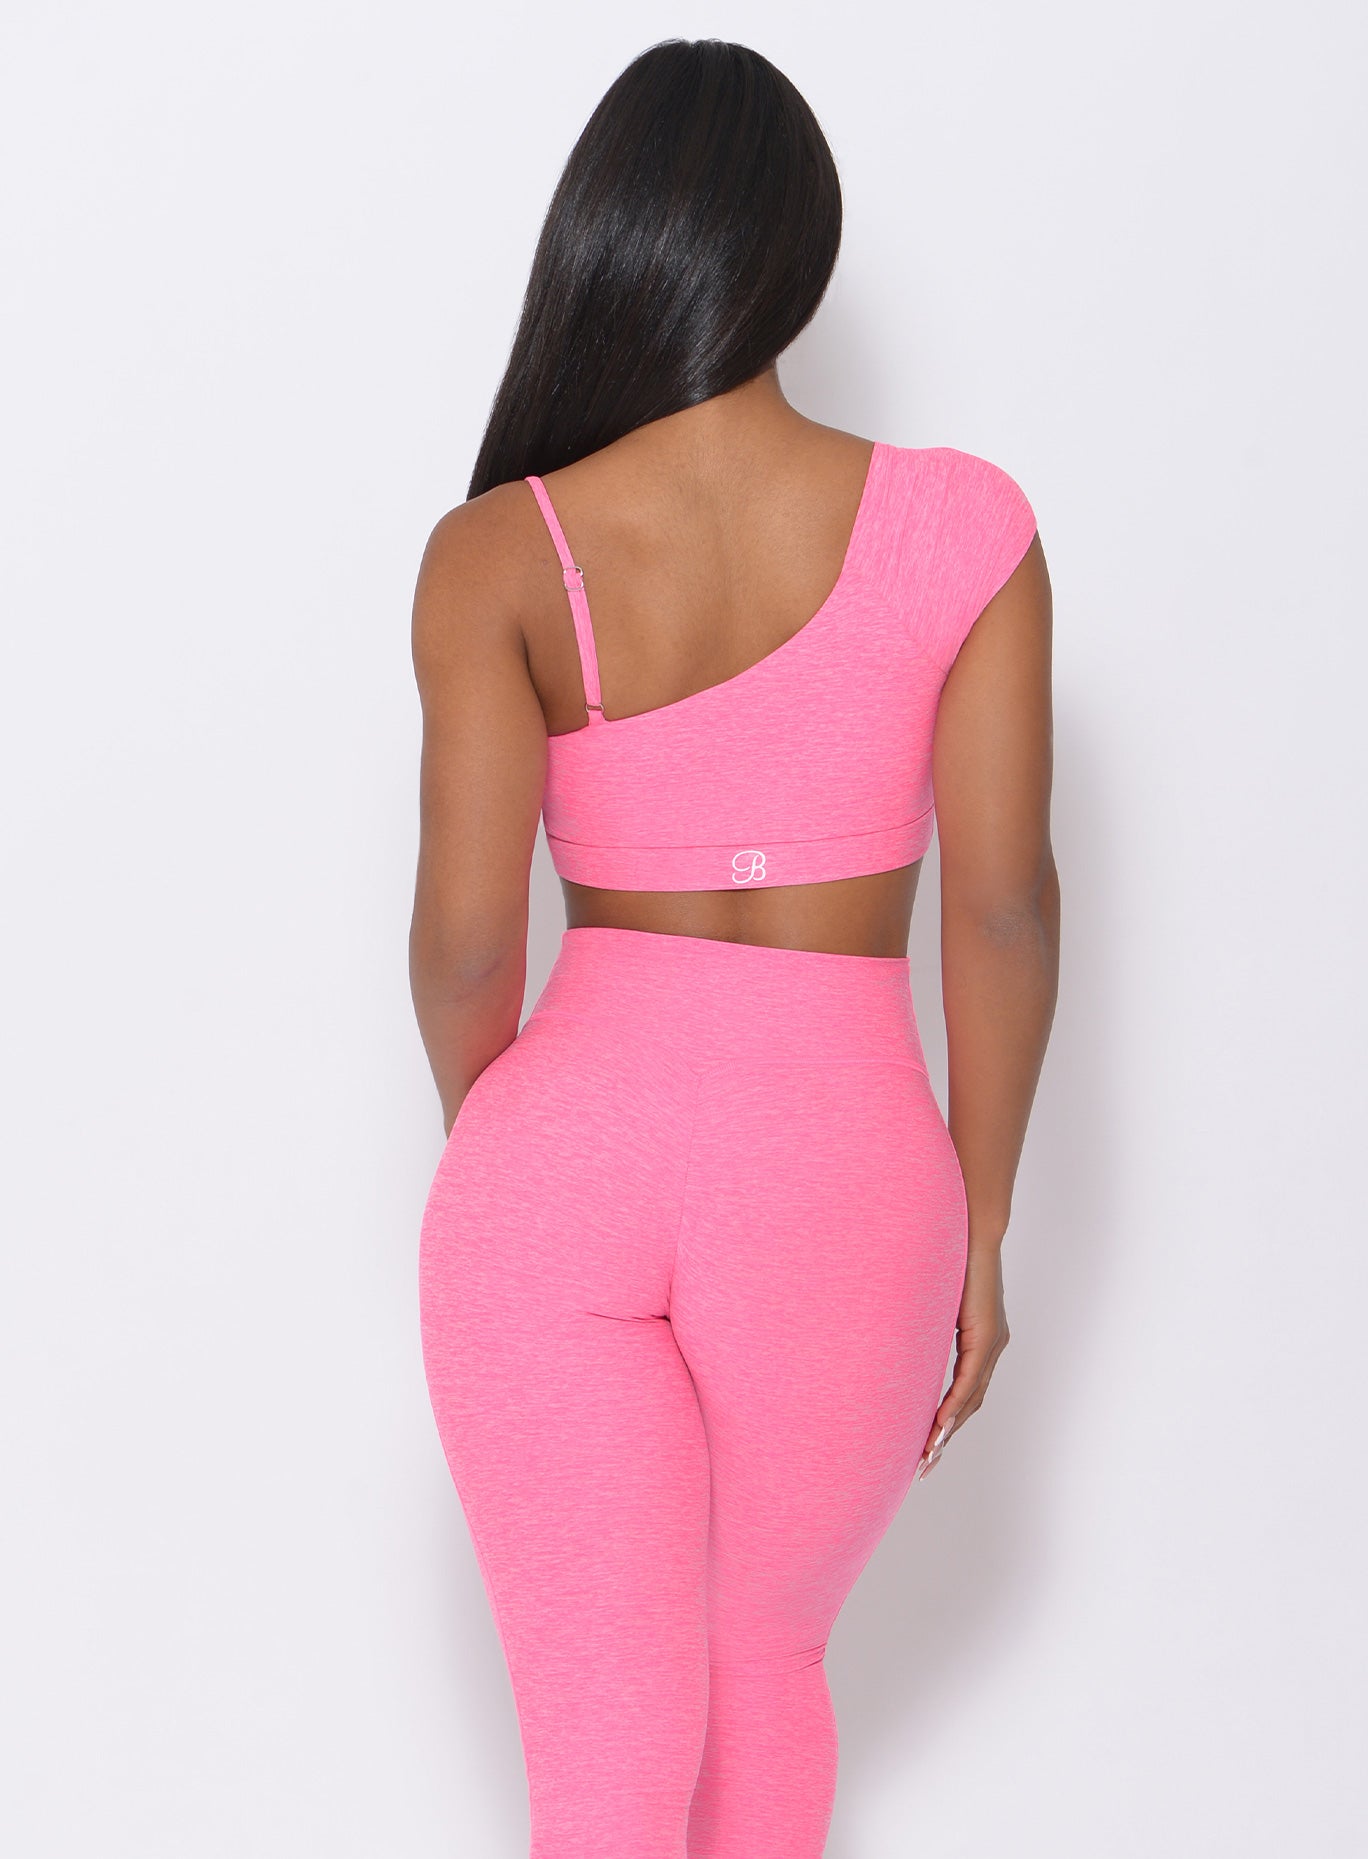 Back view of the model in our Adore Sports Bra in pink and a matching leggings